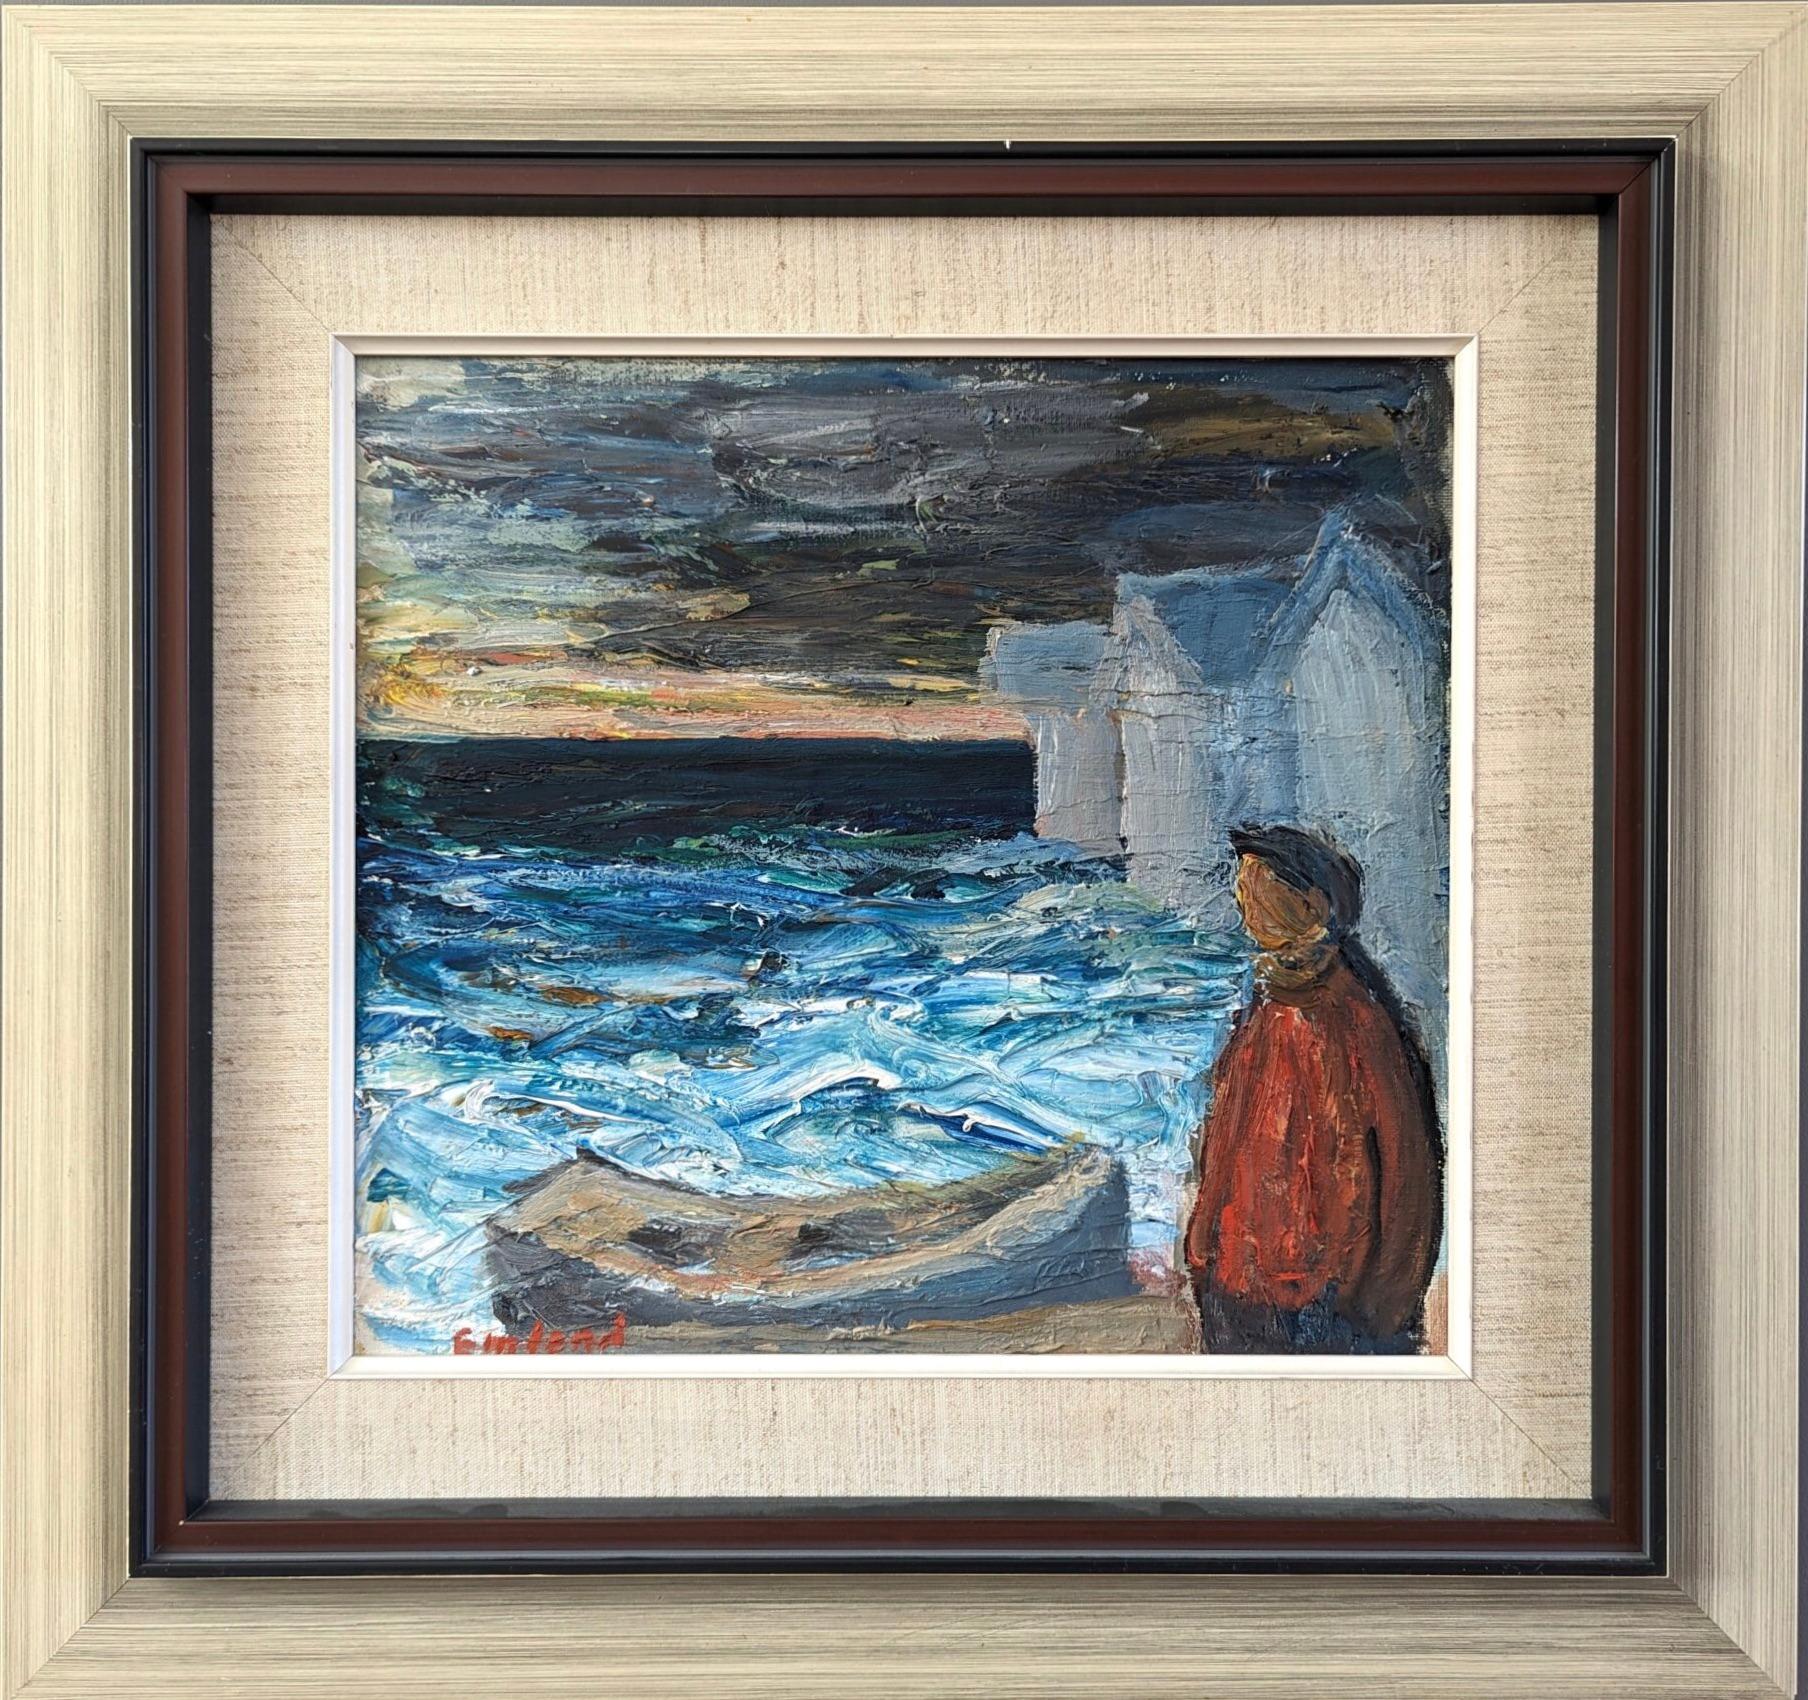 Unknown Landscape Painting - Vintage Mid-Century Swedish Seascape Oil Painting - Thoughts by the Waves